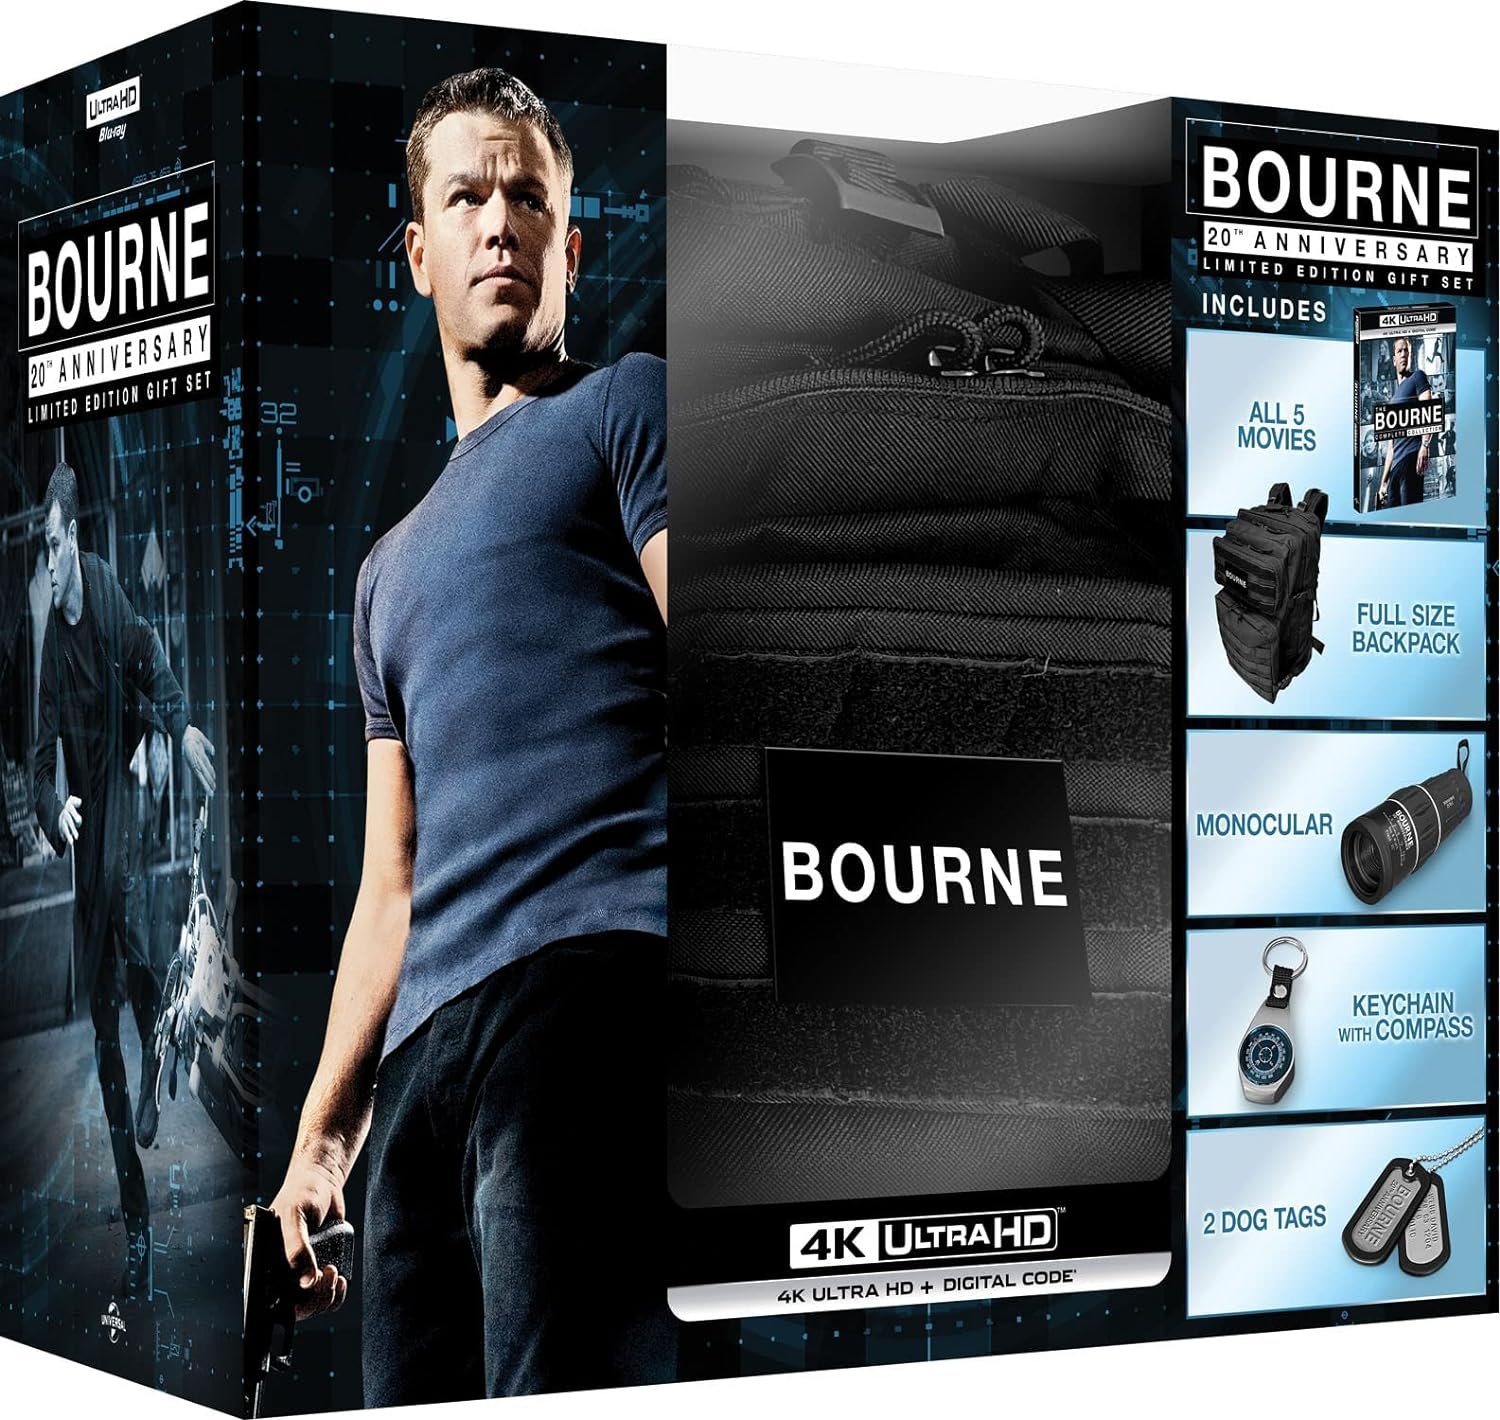 The Bourne Complete Collection - 20th Anniversary Limited Edition Gift Set (4K Ultra HD) [UHD] - image 3 of 4